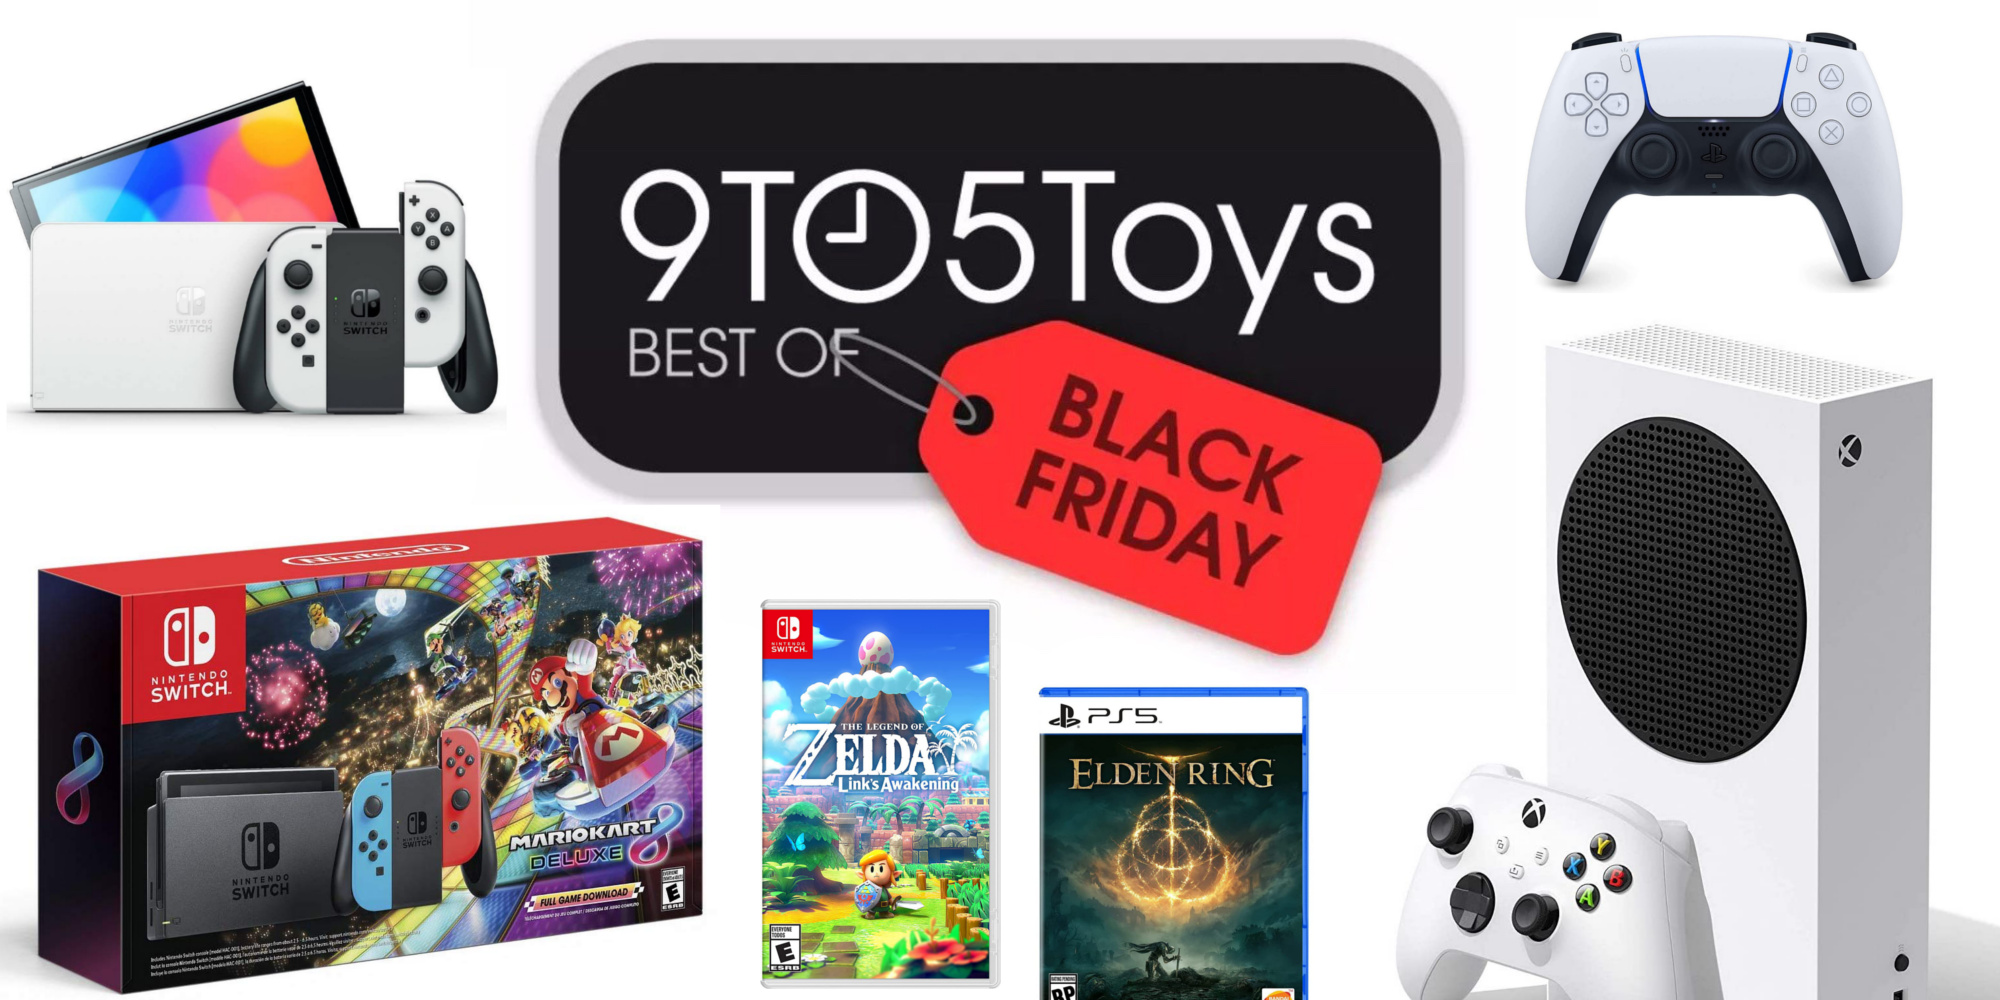 sneeze Lodge Recollection Best Black Friday game deals from Nintendo, Sony, and Xbox